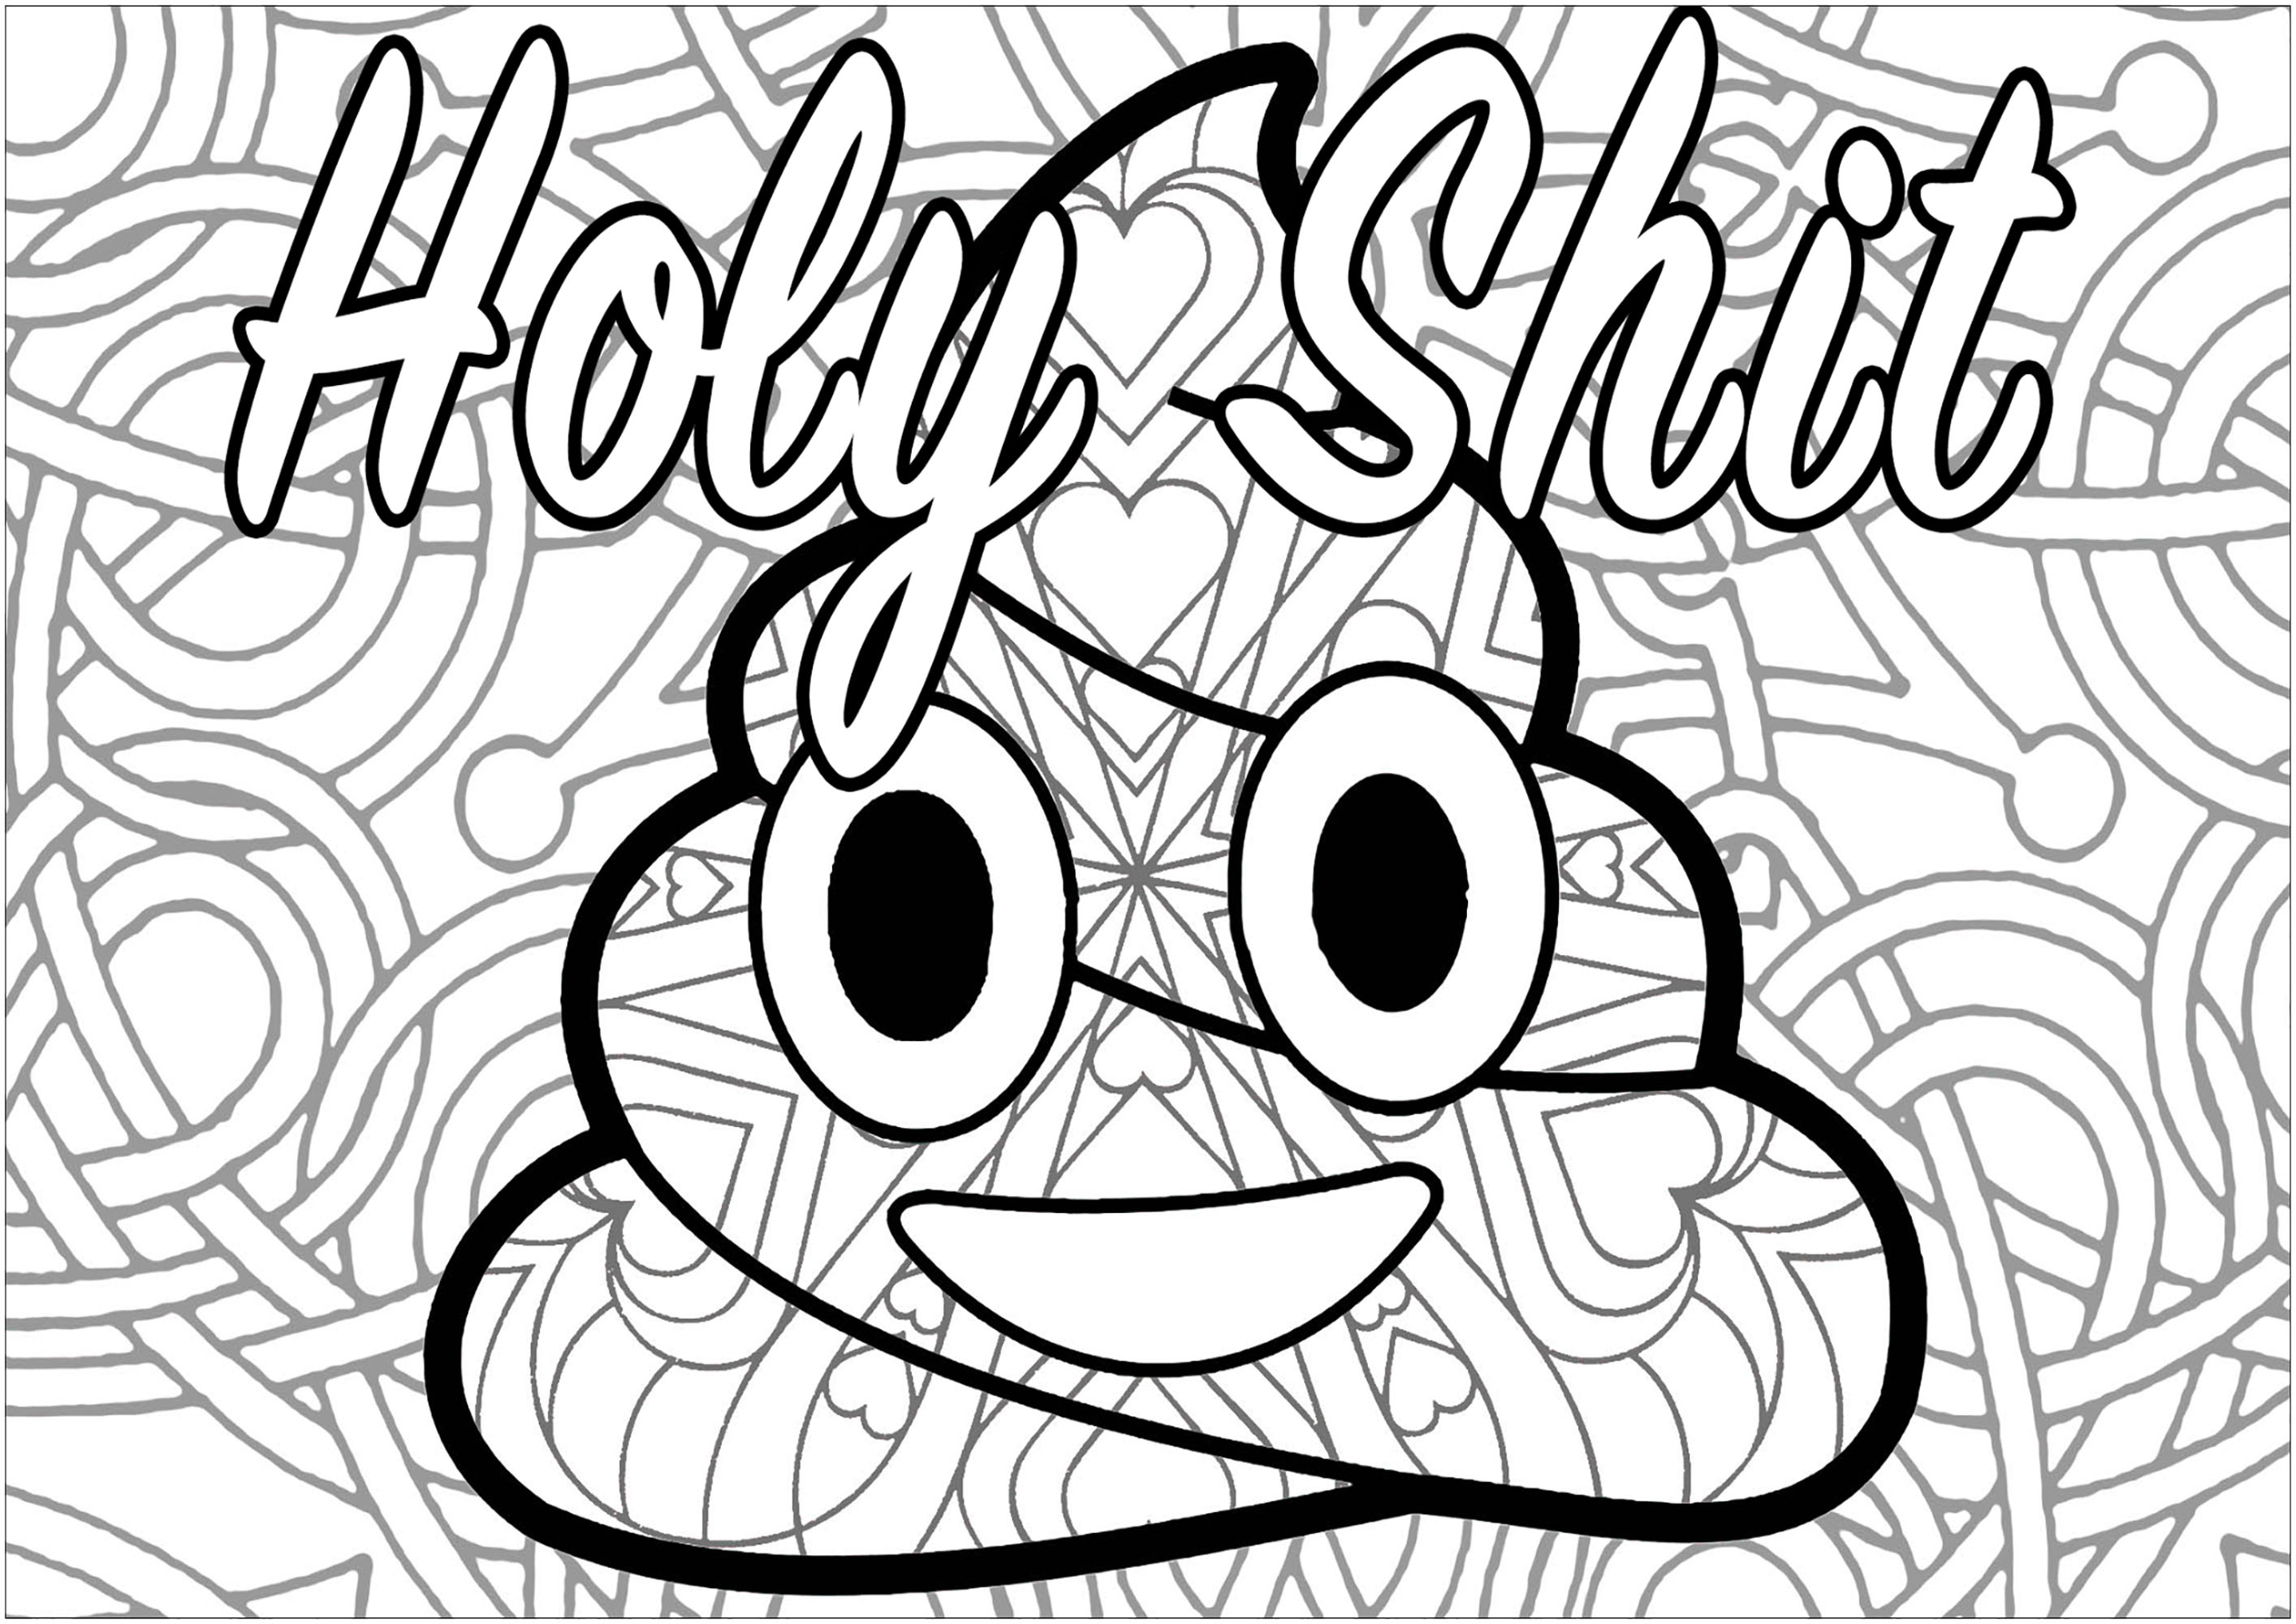 Holy shit swear word coloring page